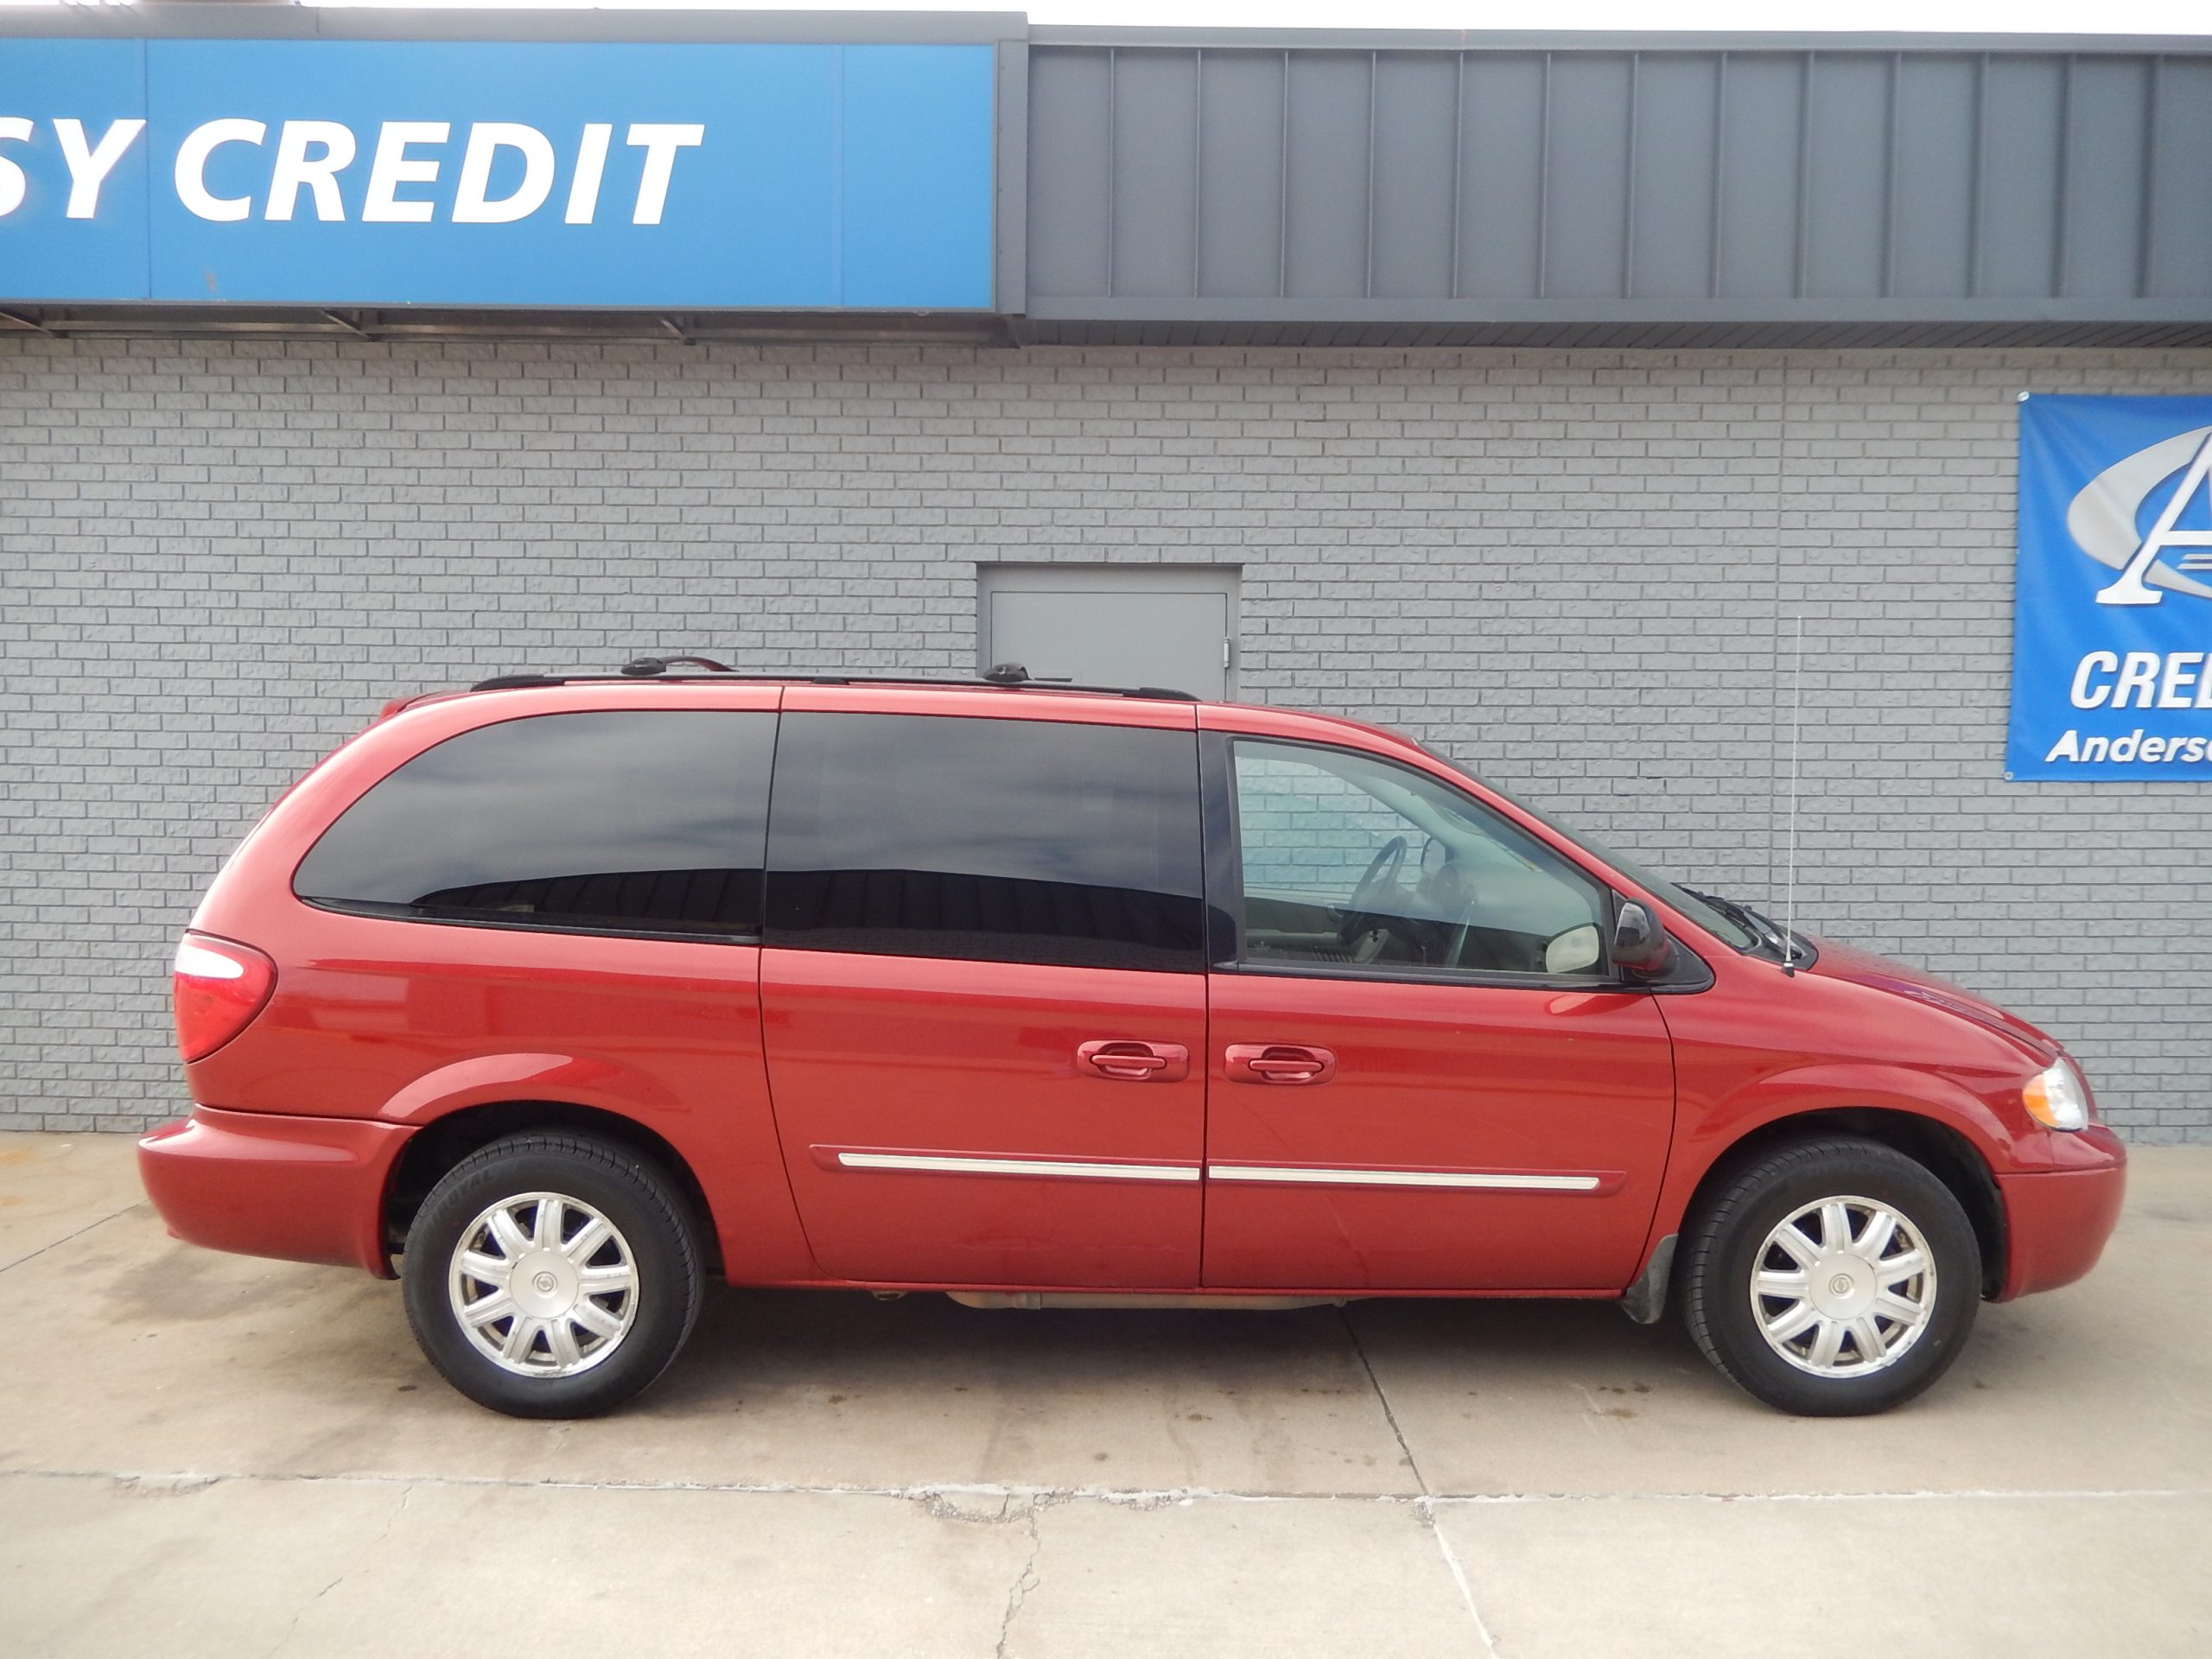 2007 town and country van